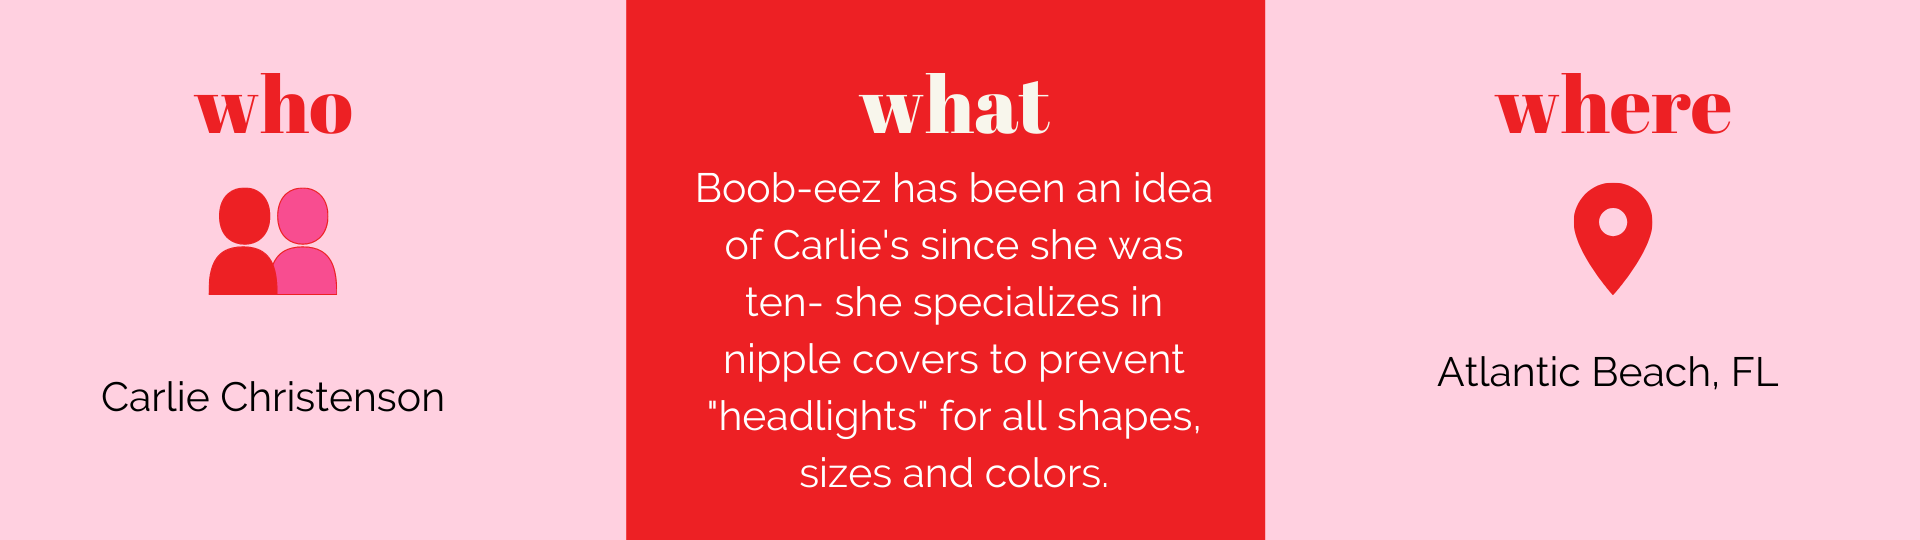 Text graphic that showcases the brand story of Boob-eez, a fashion-fix accessories brand that creates silicone nipple covers.